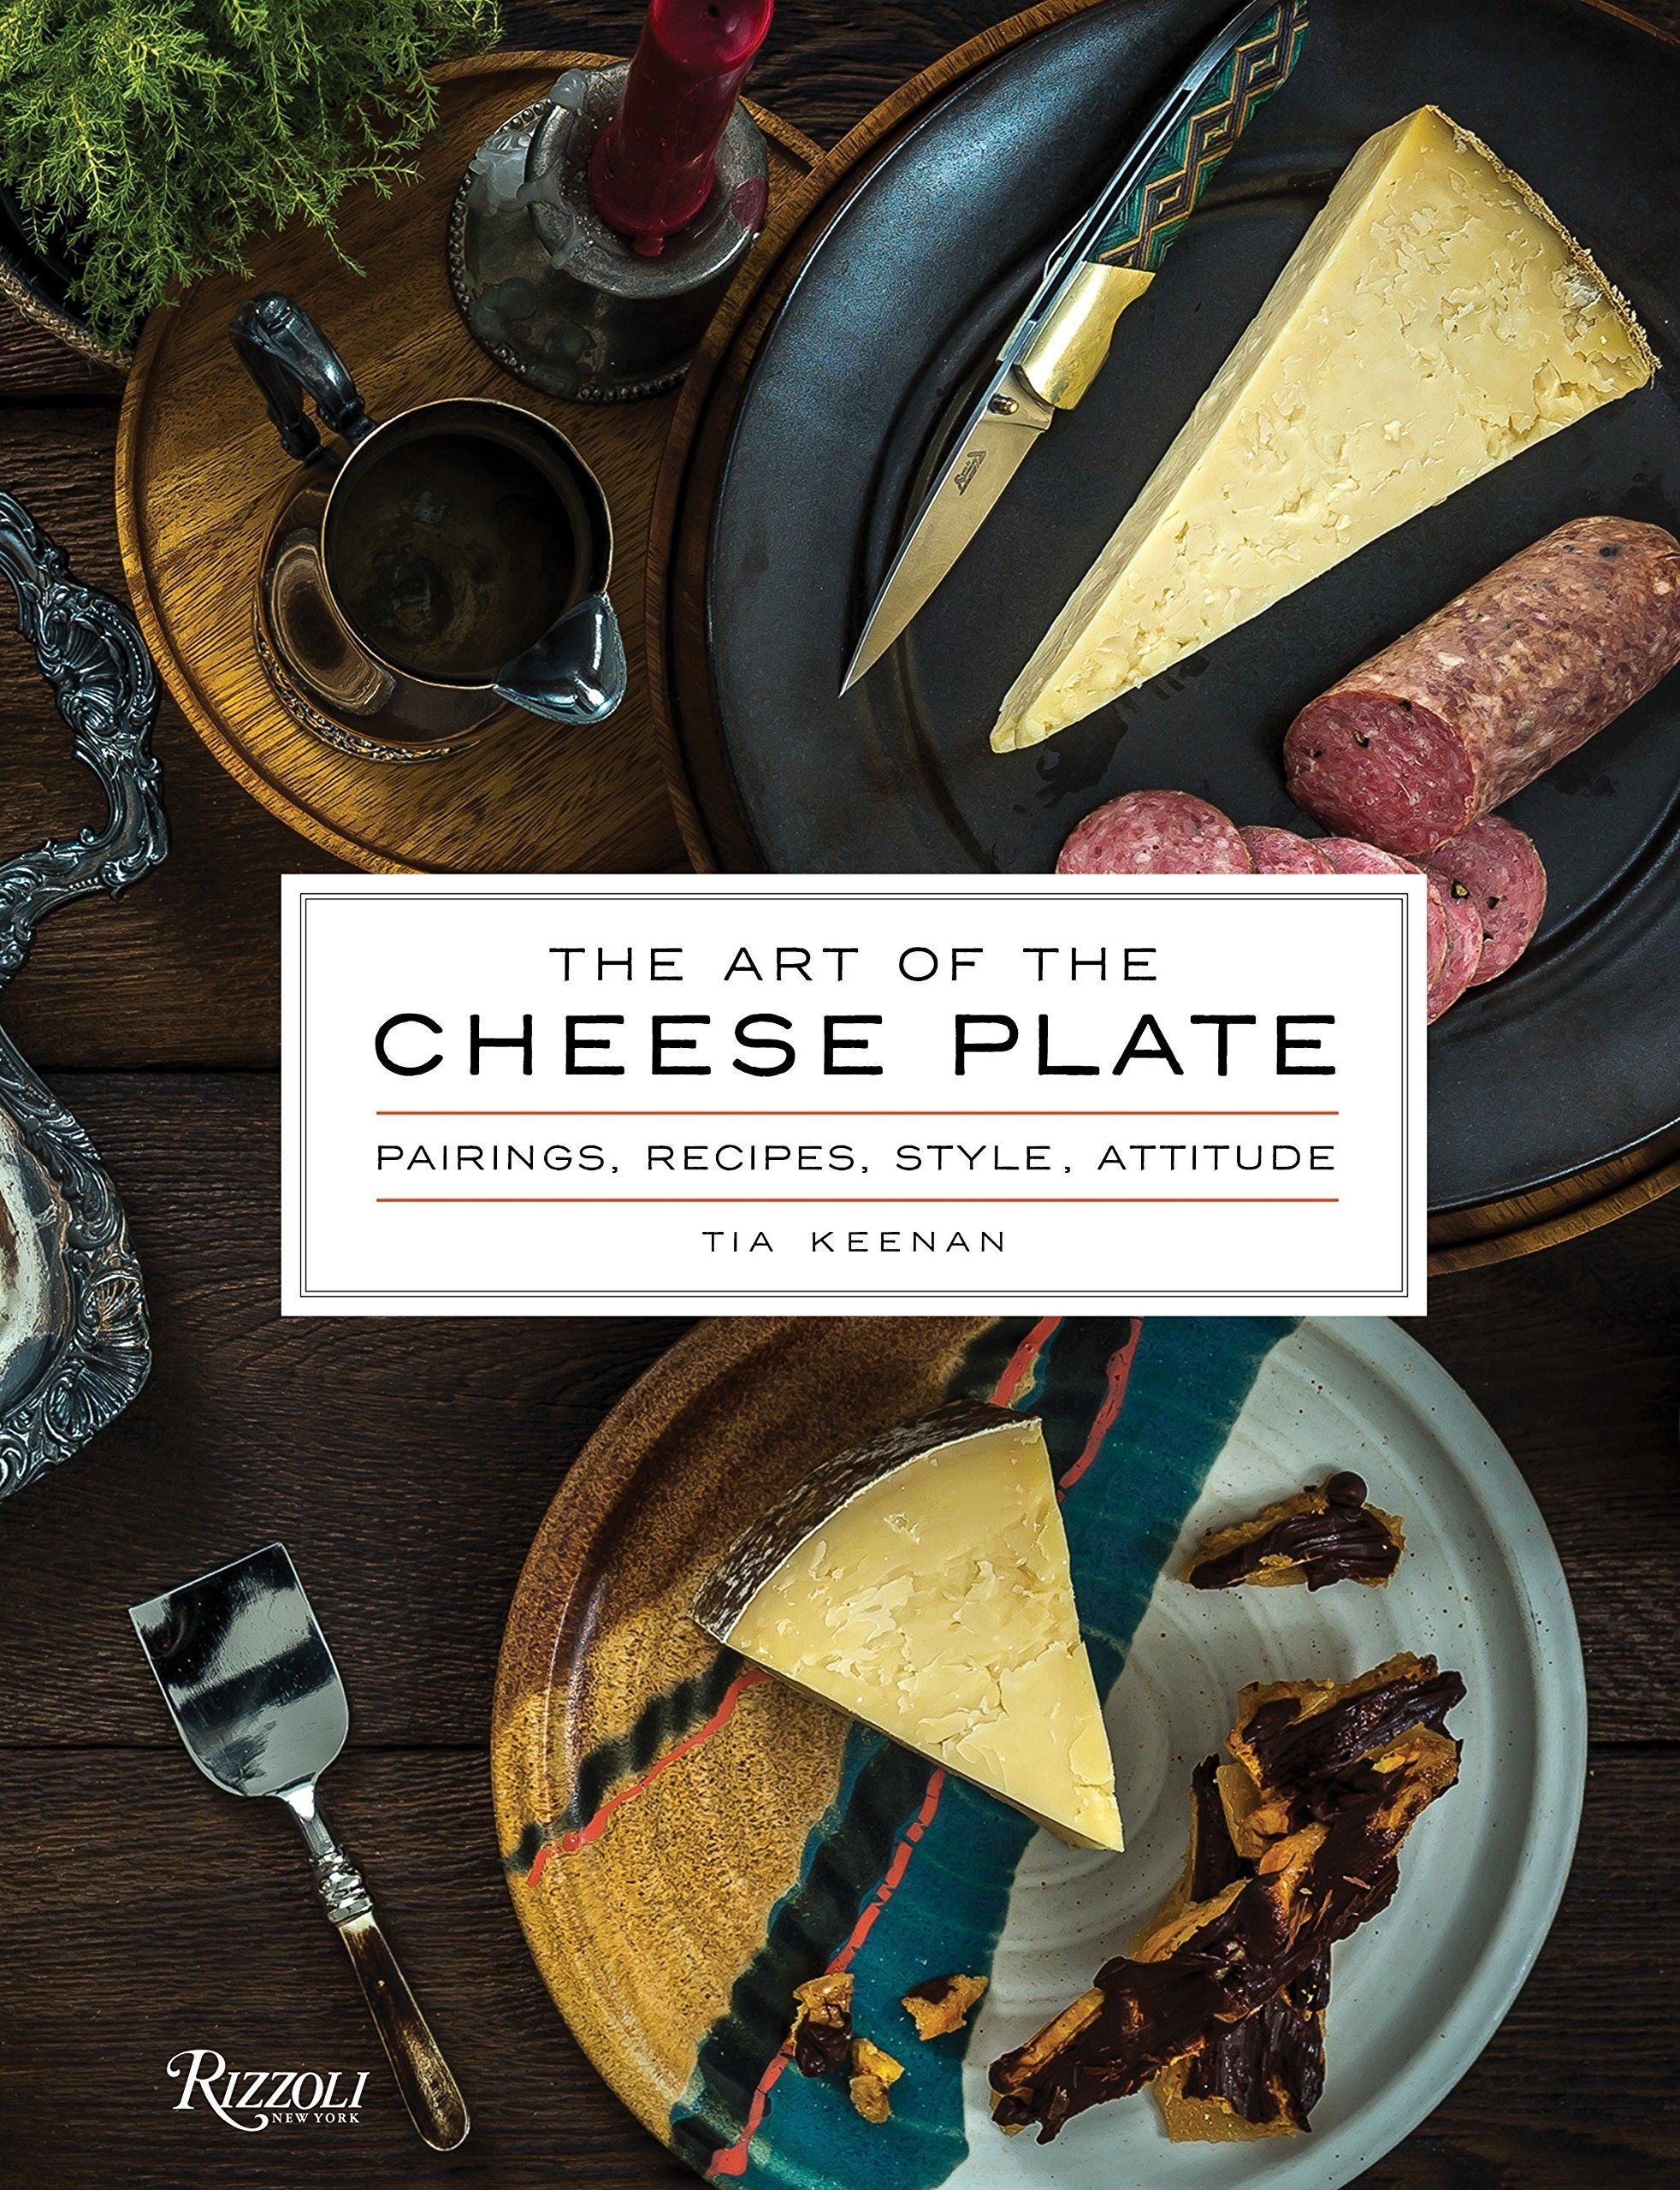 "The Art of the Cheese Plate"